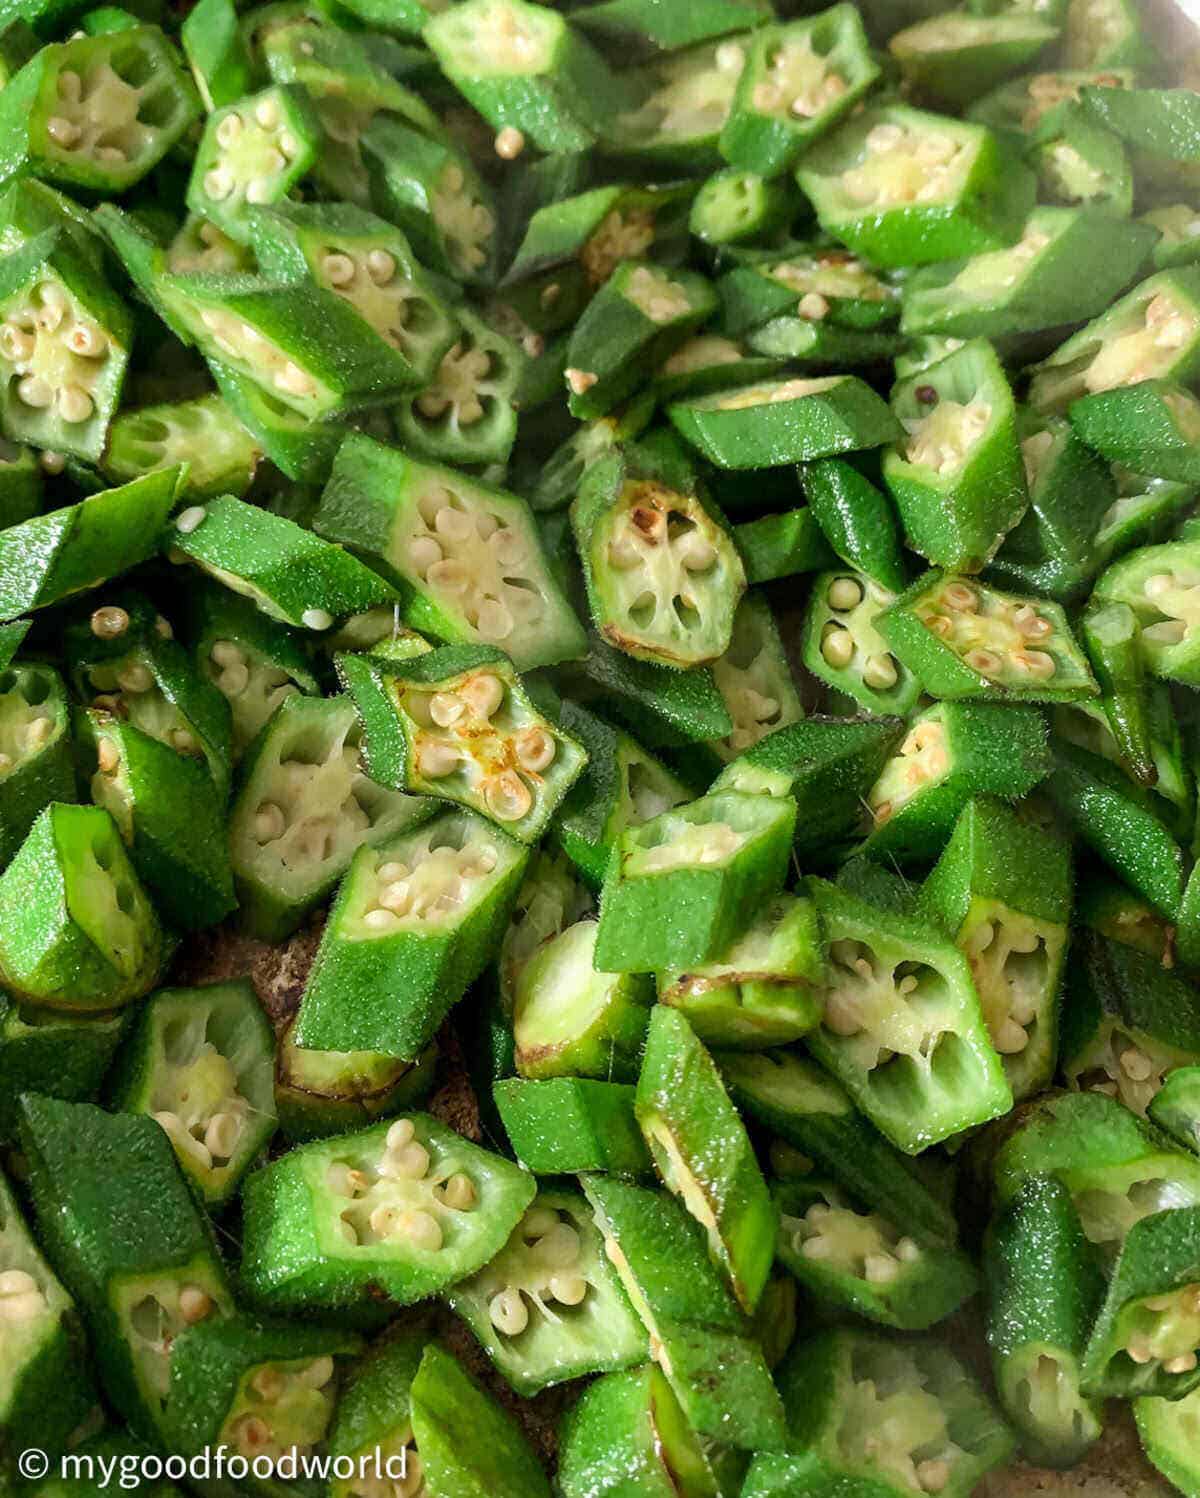 Sliced okra pieces frting in oil till they get a slight brown coloring on them.